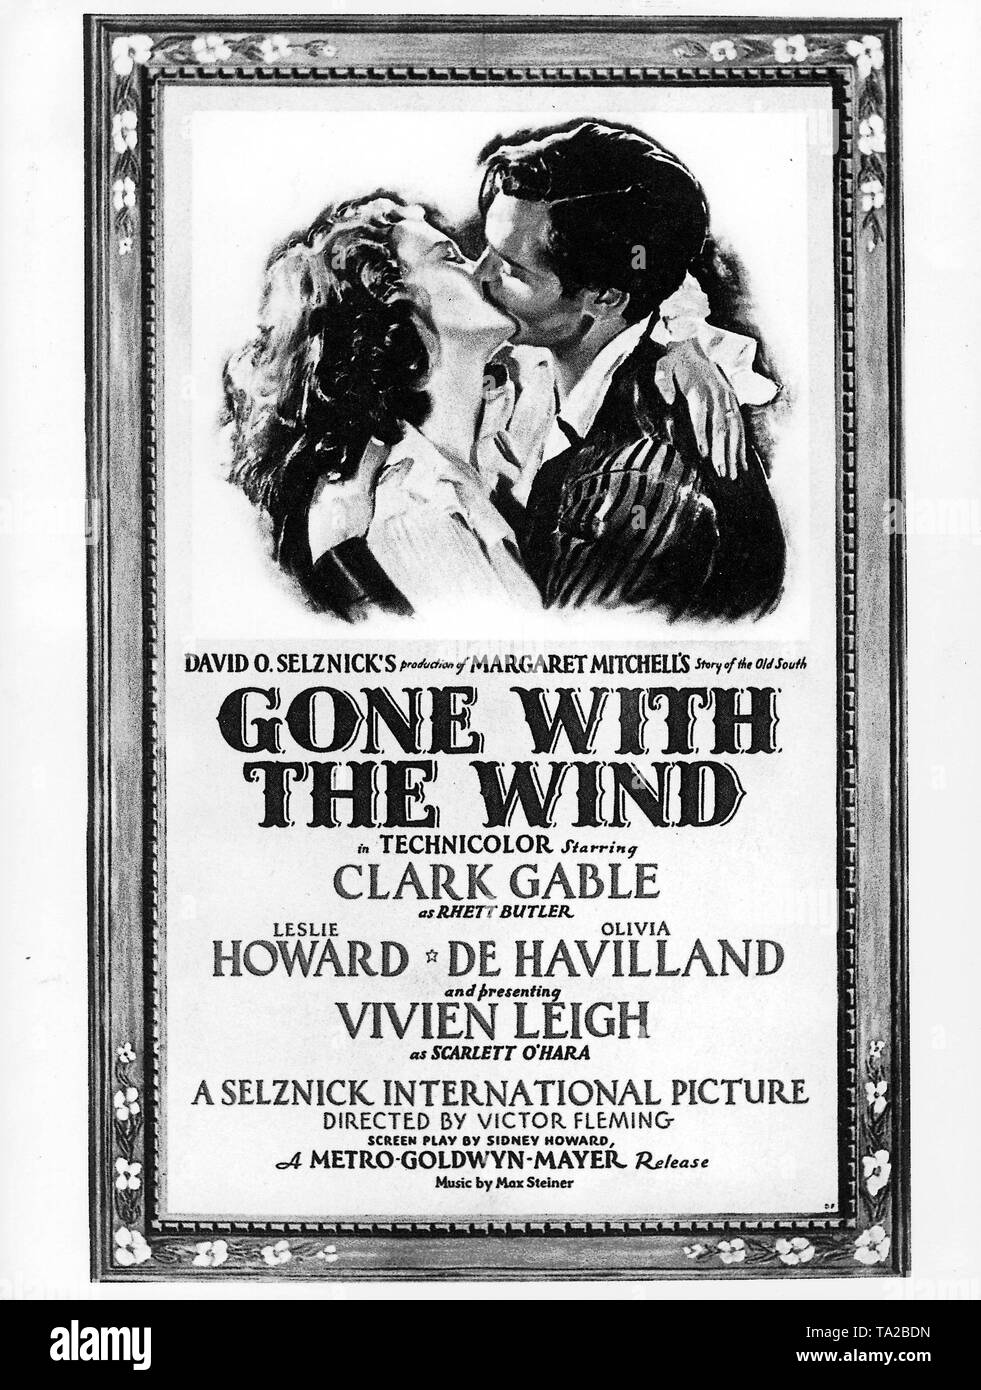 Movie poster for the film 'Gone with the Wind' (USA 1939) with Vivien Leigh and Clark Gable, directed by Victor Fleming. Stock Photo